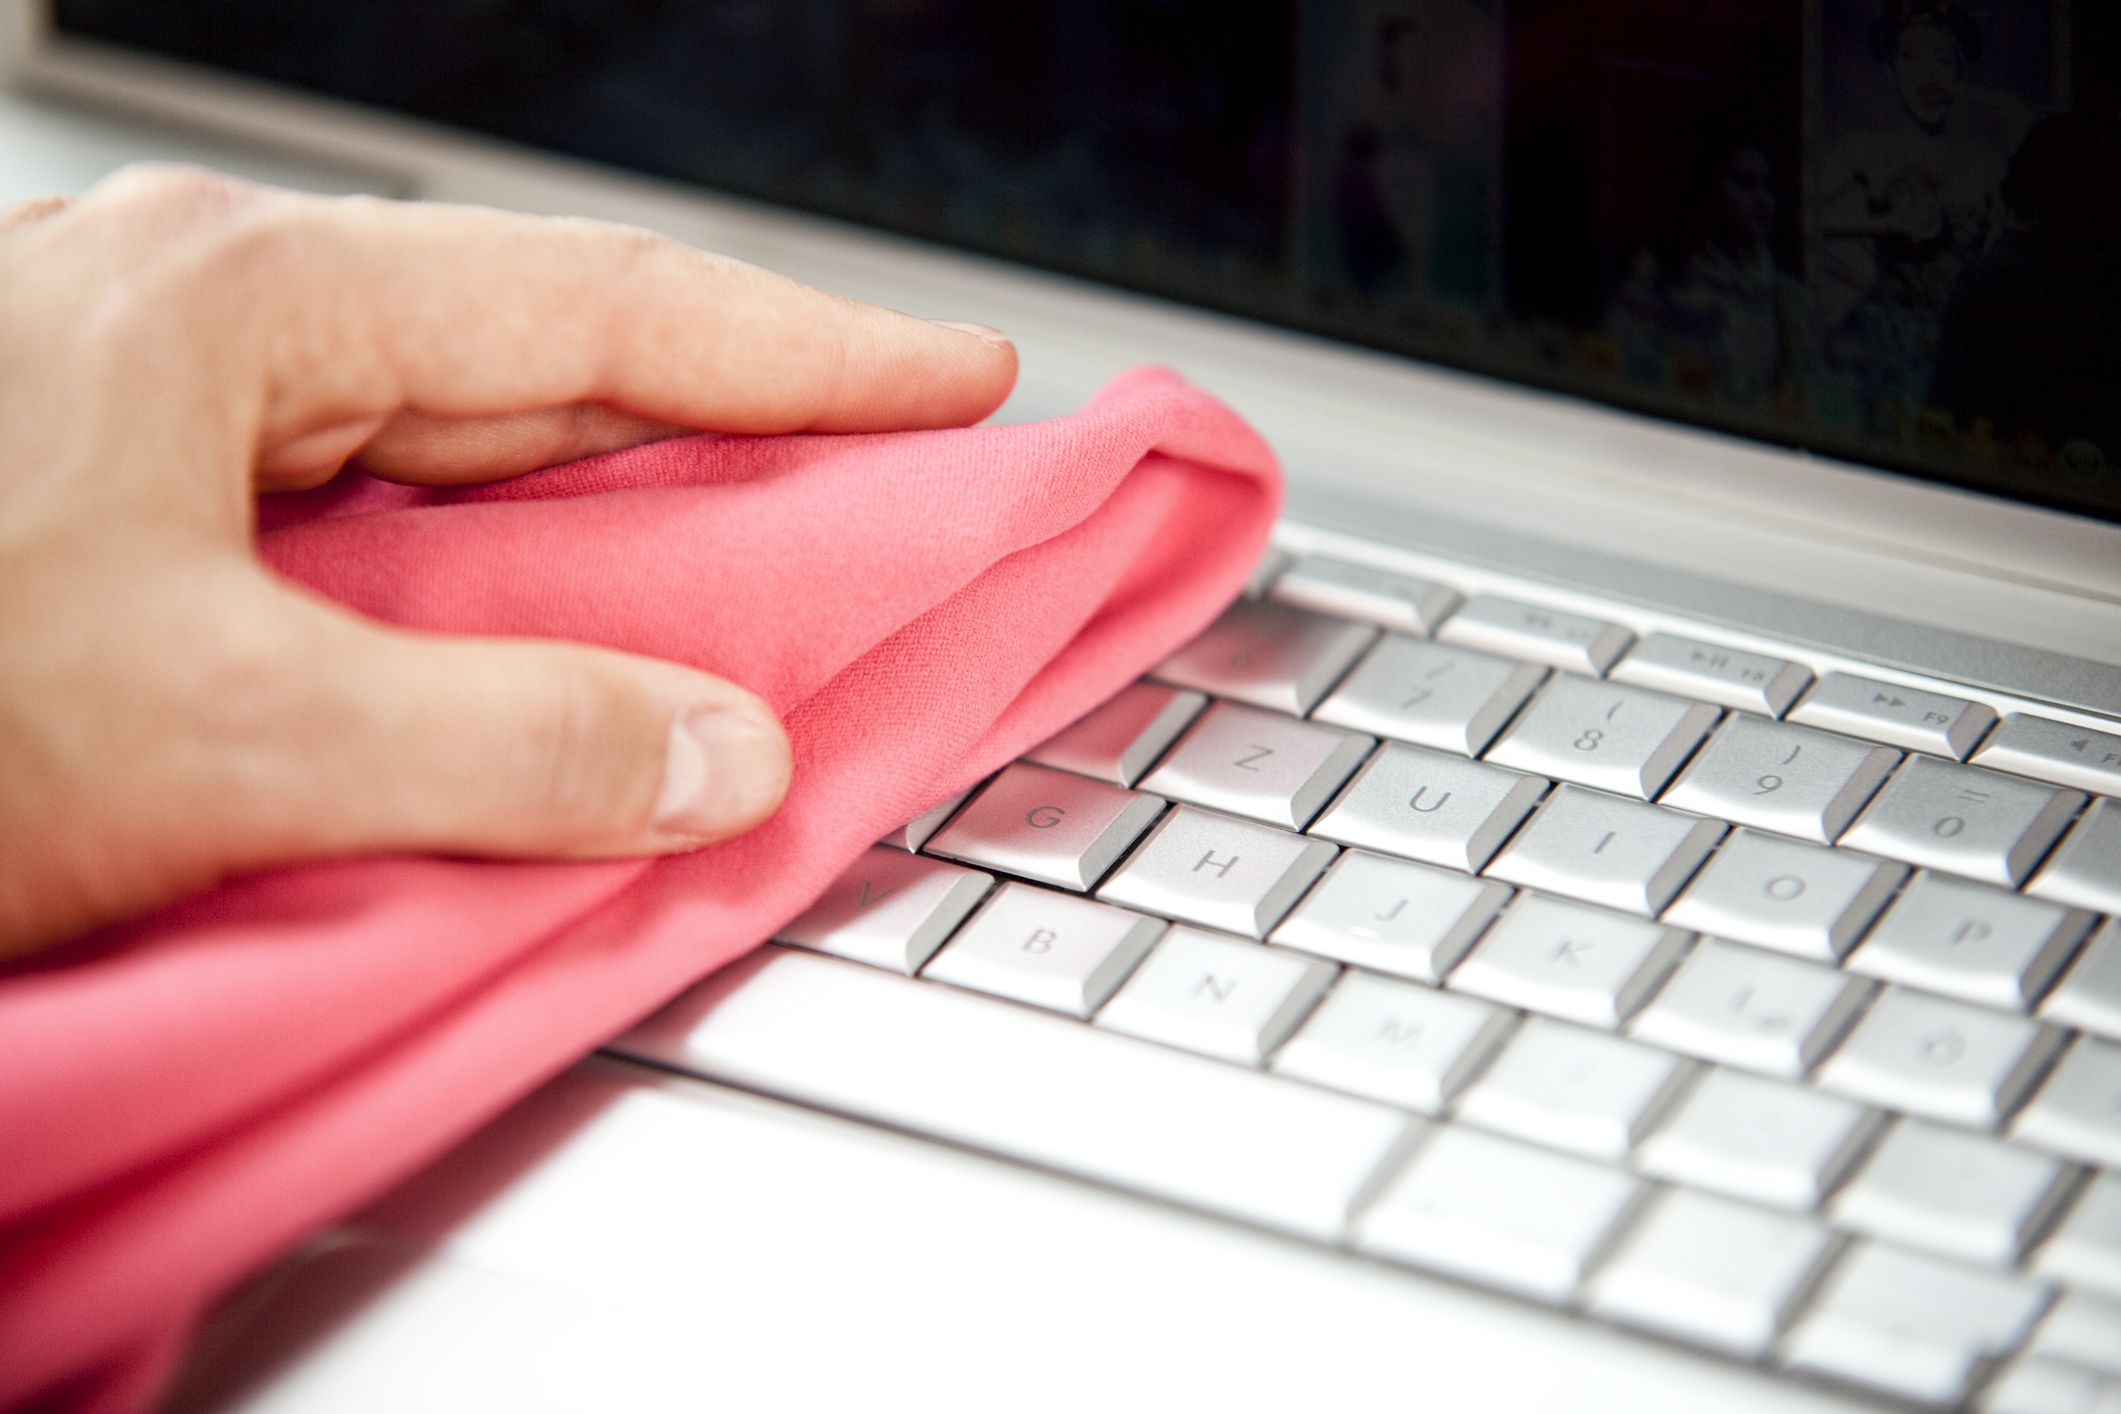 How to Keep Your Mac Keyboard and Mouse Clean